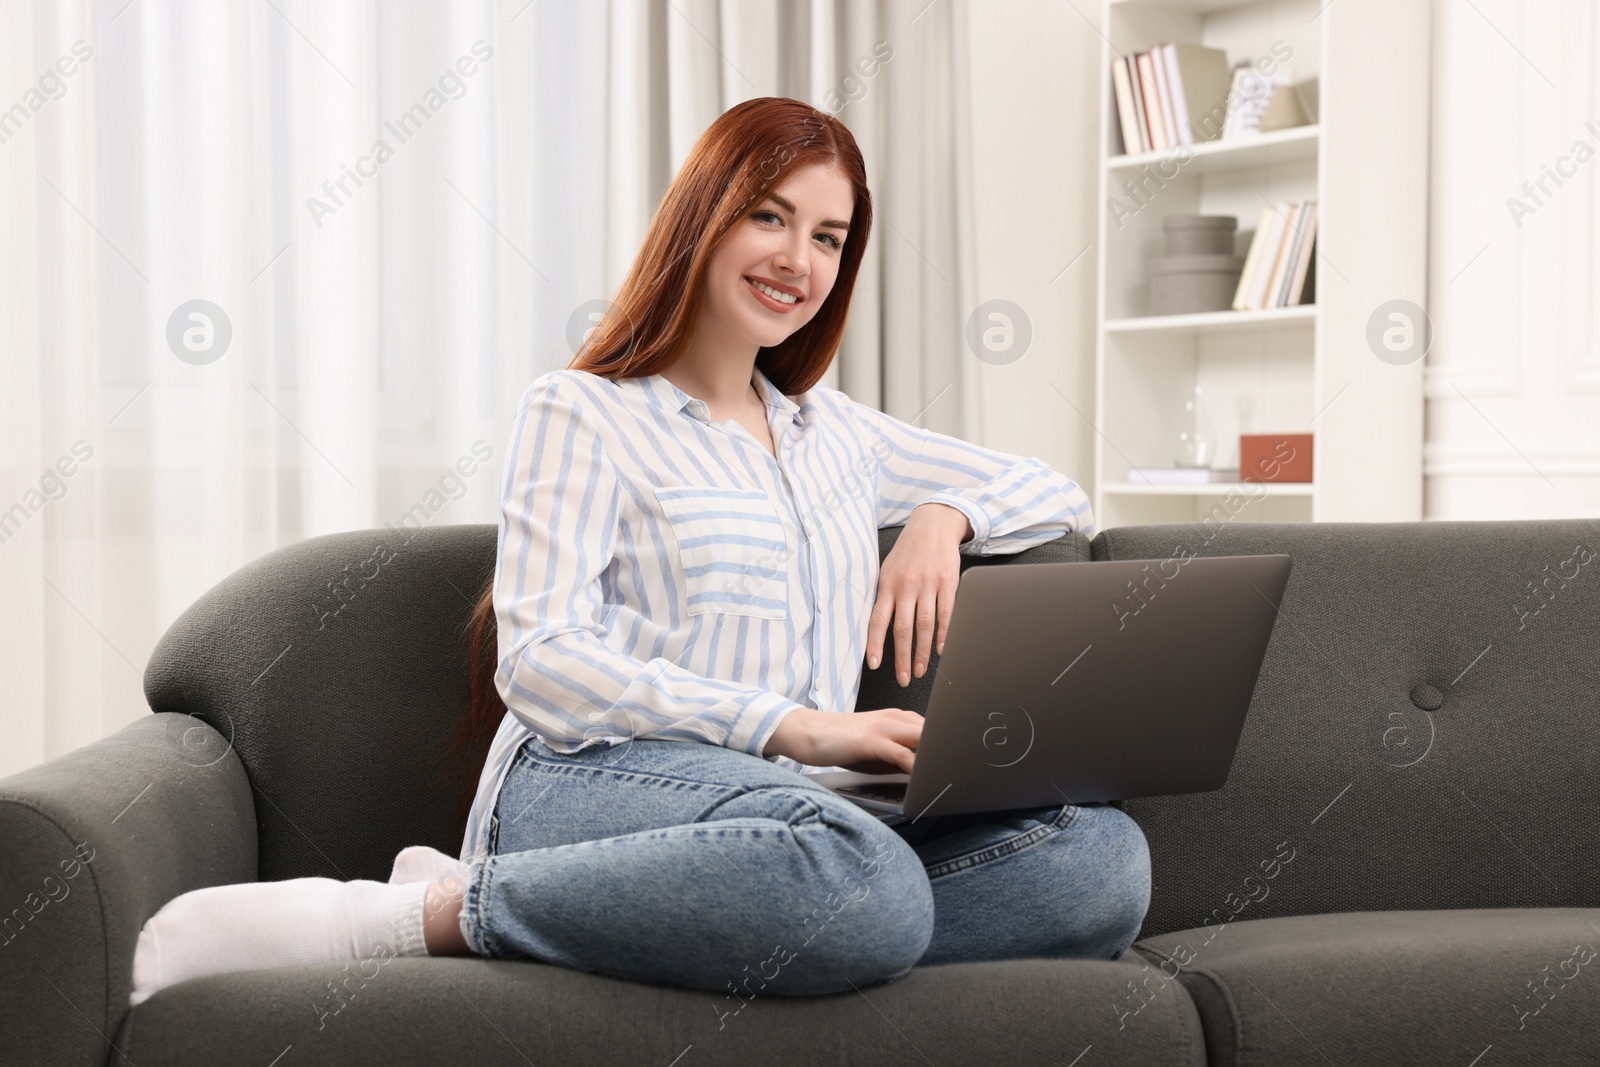 Photo of Happy woman with laptop sitting on couch in room